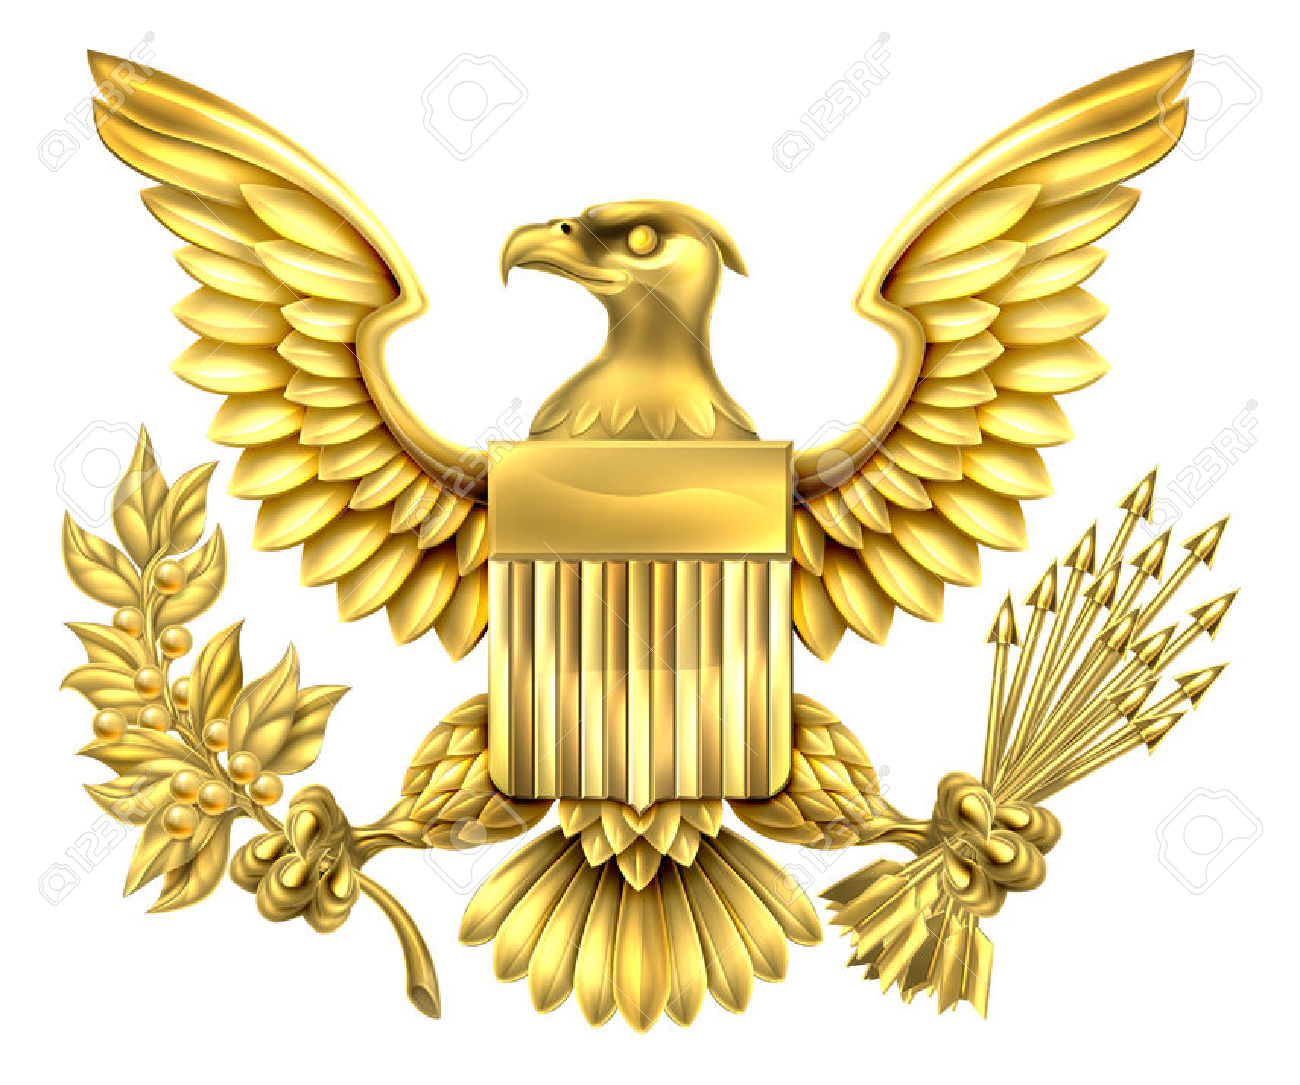 Golden Eagle clipart #12, Download drawings